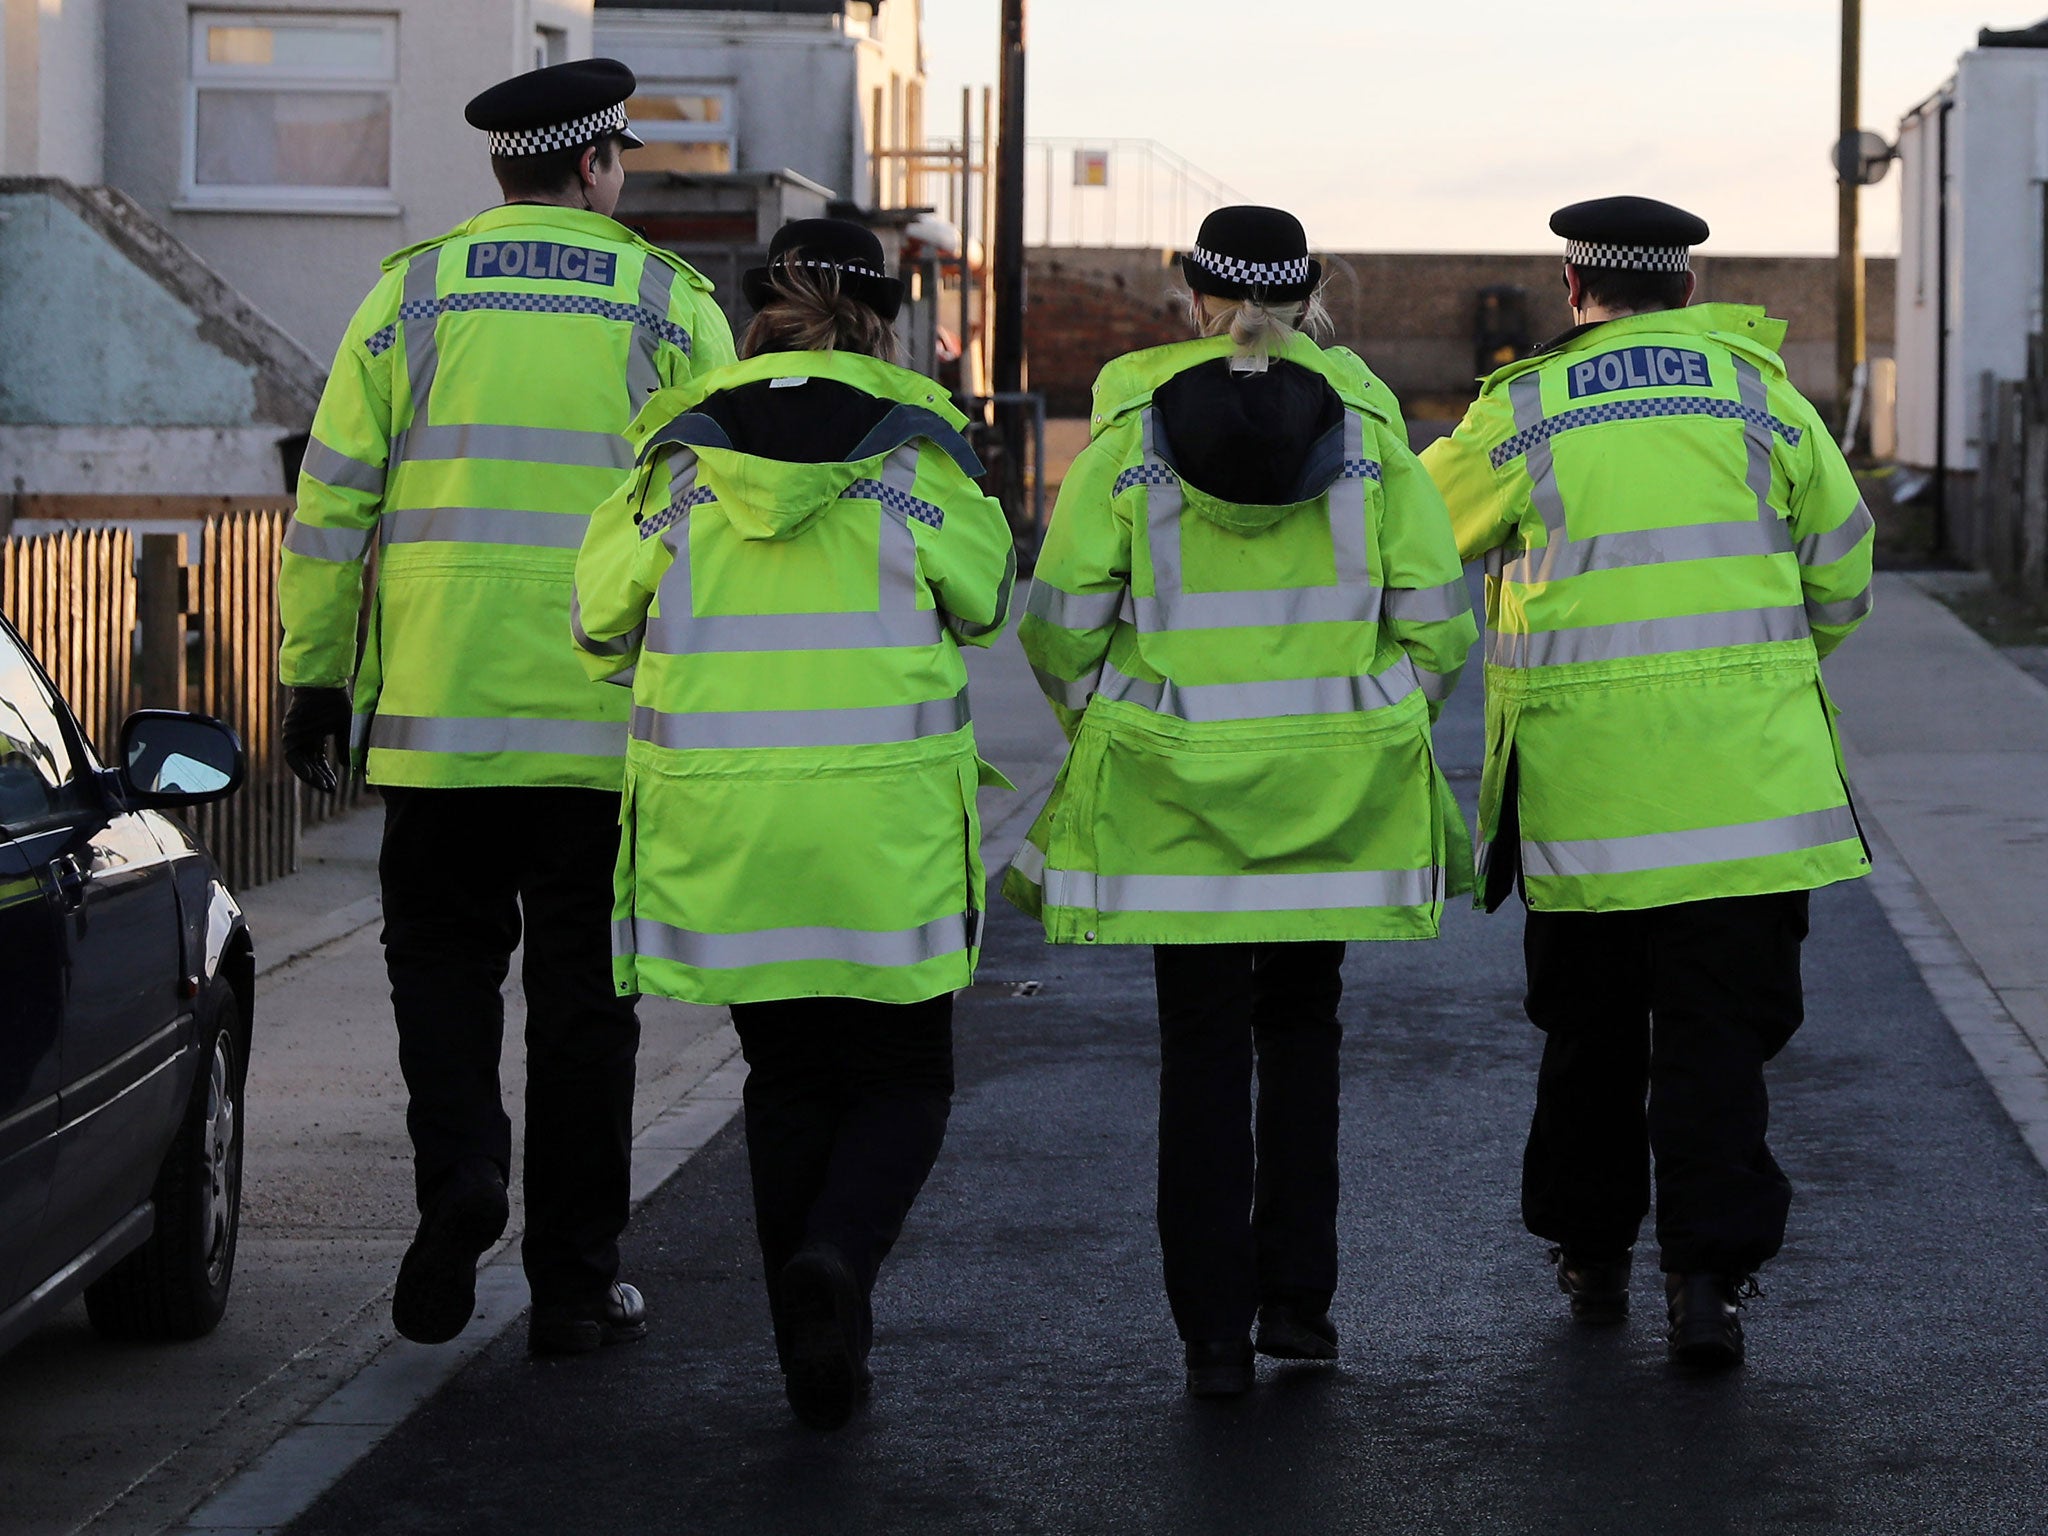 There are now a record number of female and BAME officers but forces are still not representative of the wider population